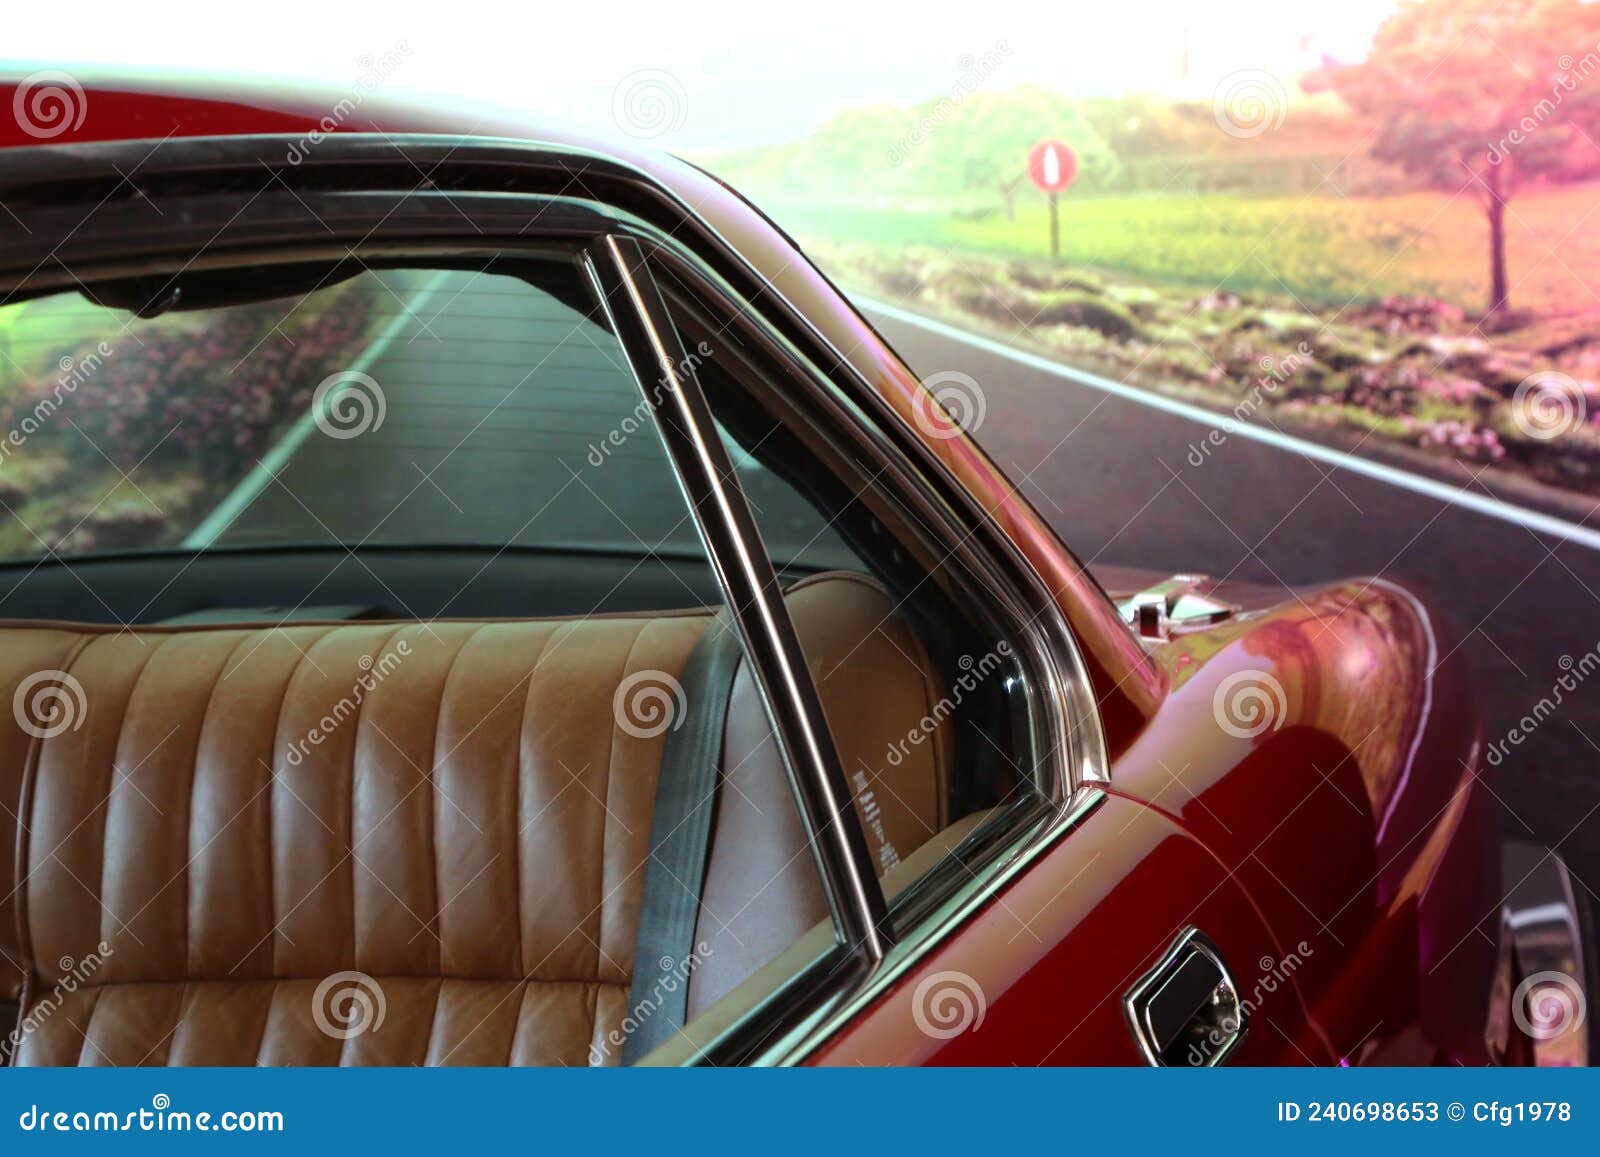 classic  car. red car. view of the rear seat in brown leather. close up. high-end car. collectable. vehicle. conveyance. rea